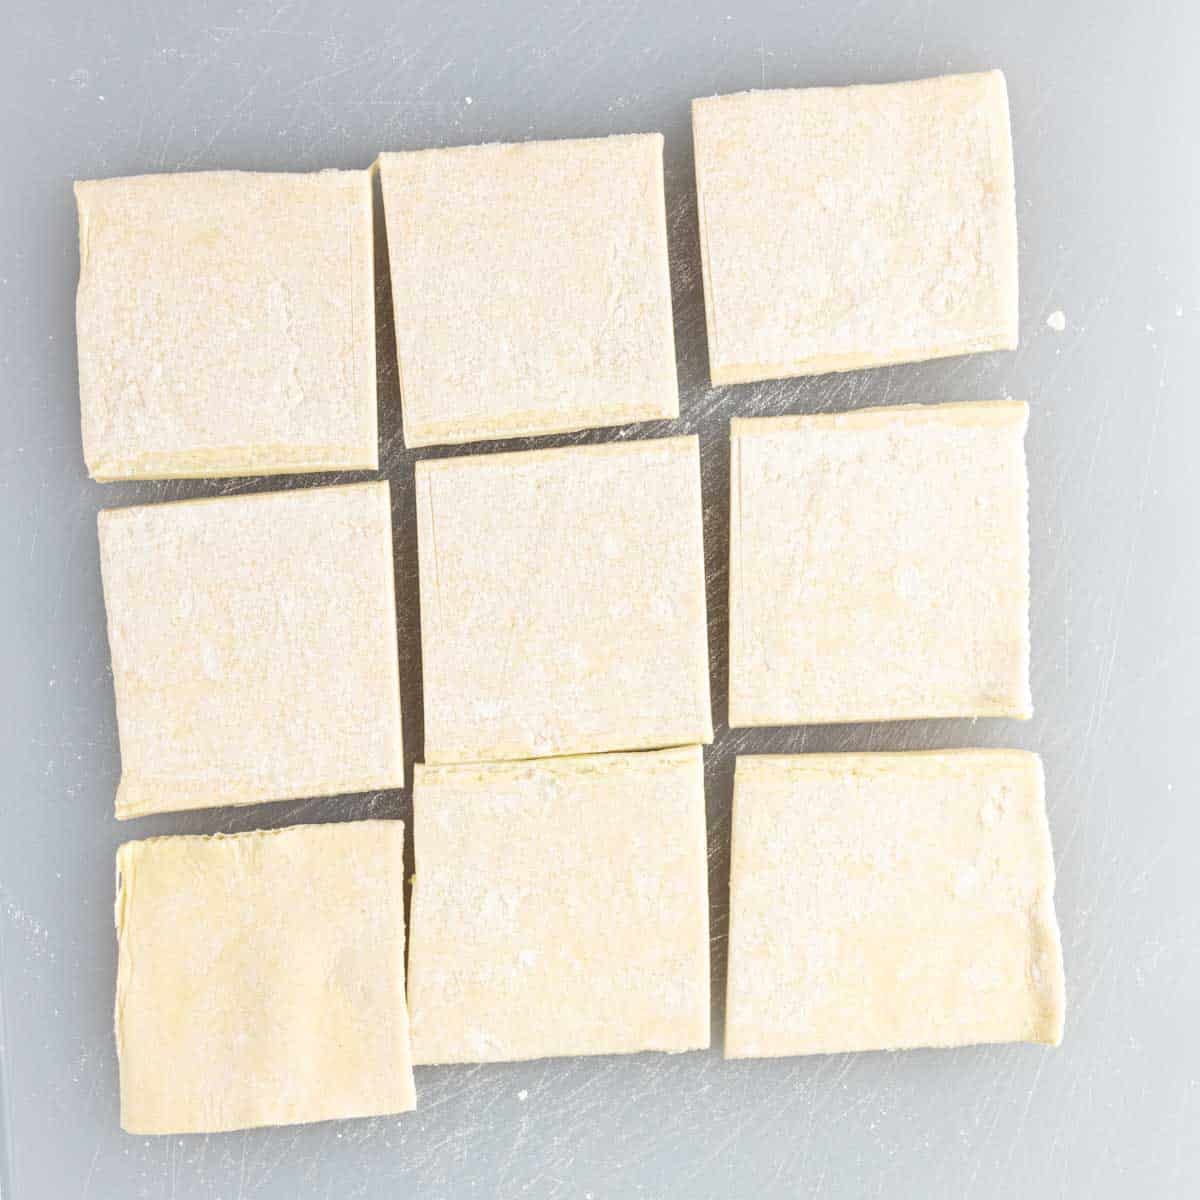 Squares of pastry dough are laid out on a cutting board to make Spinach Puffs